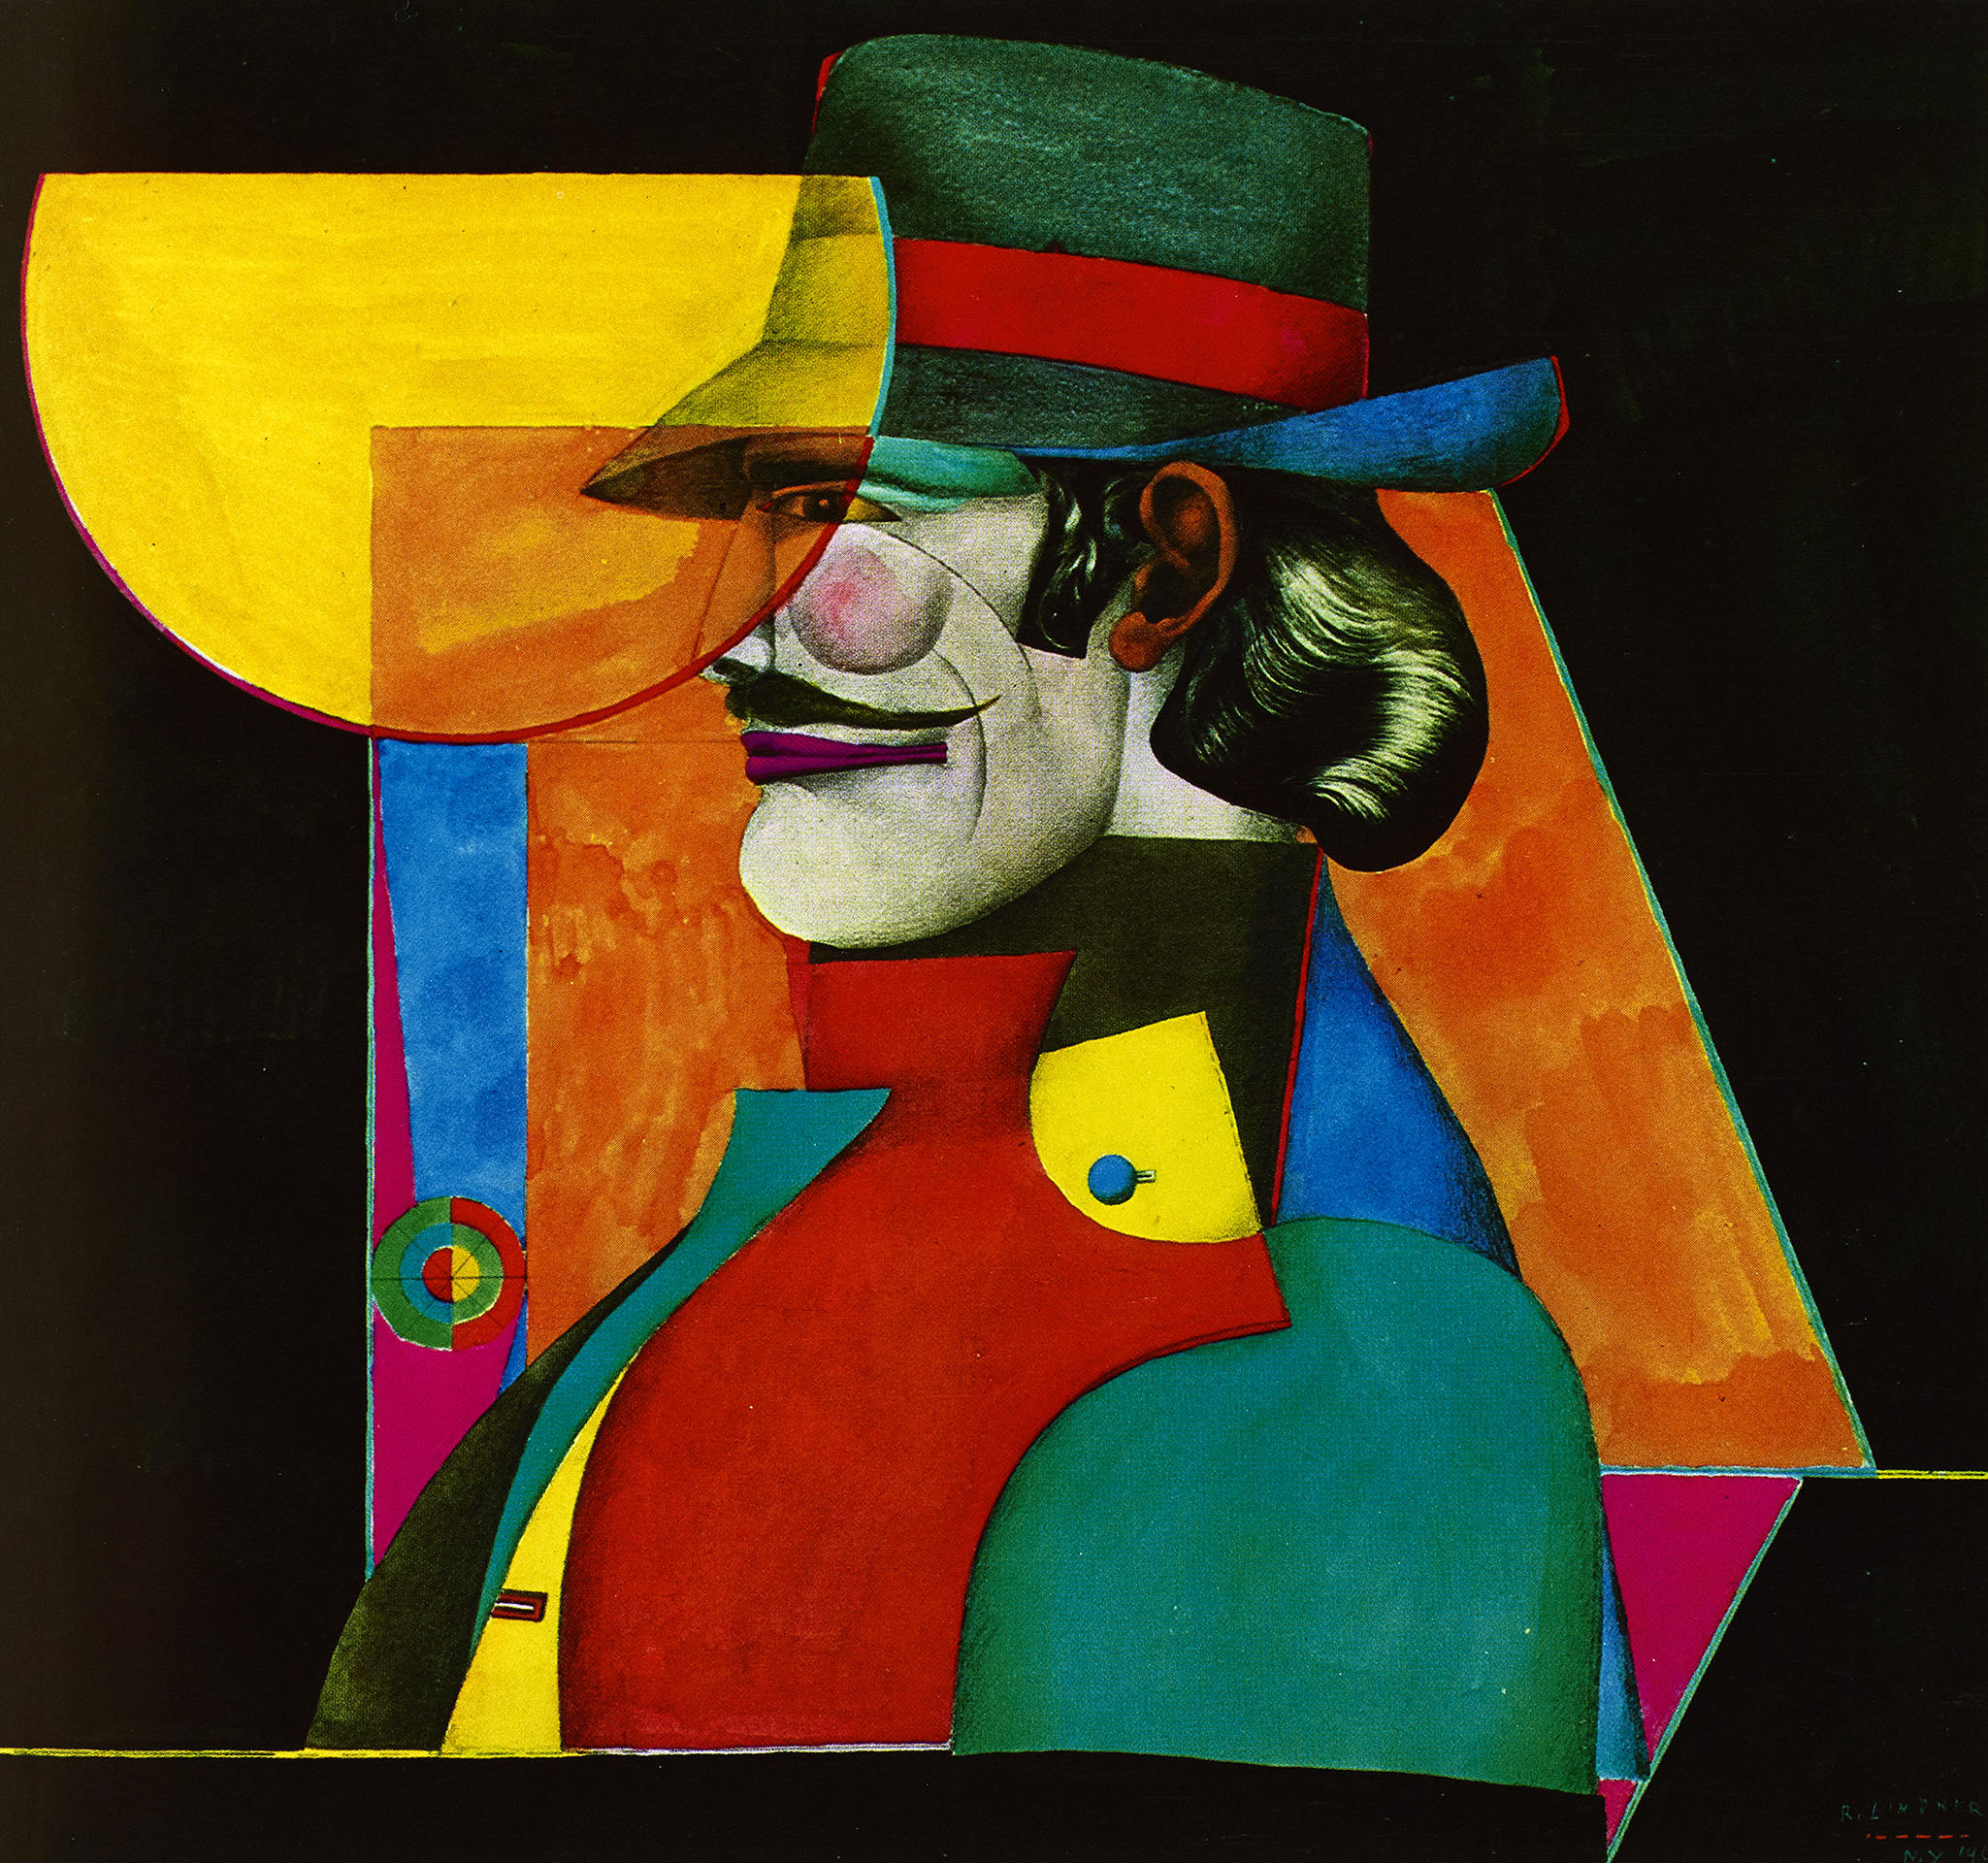 The Gift (Profile of Man with Hat and Red Band), 1969